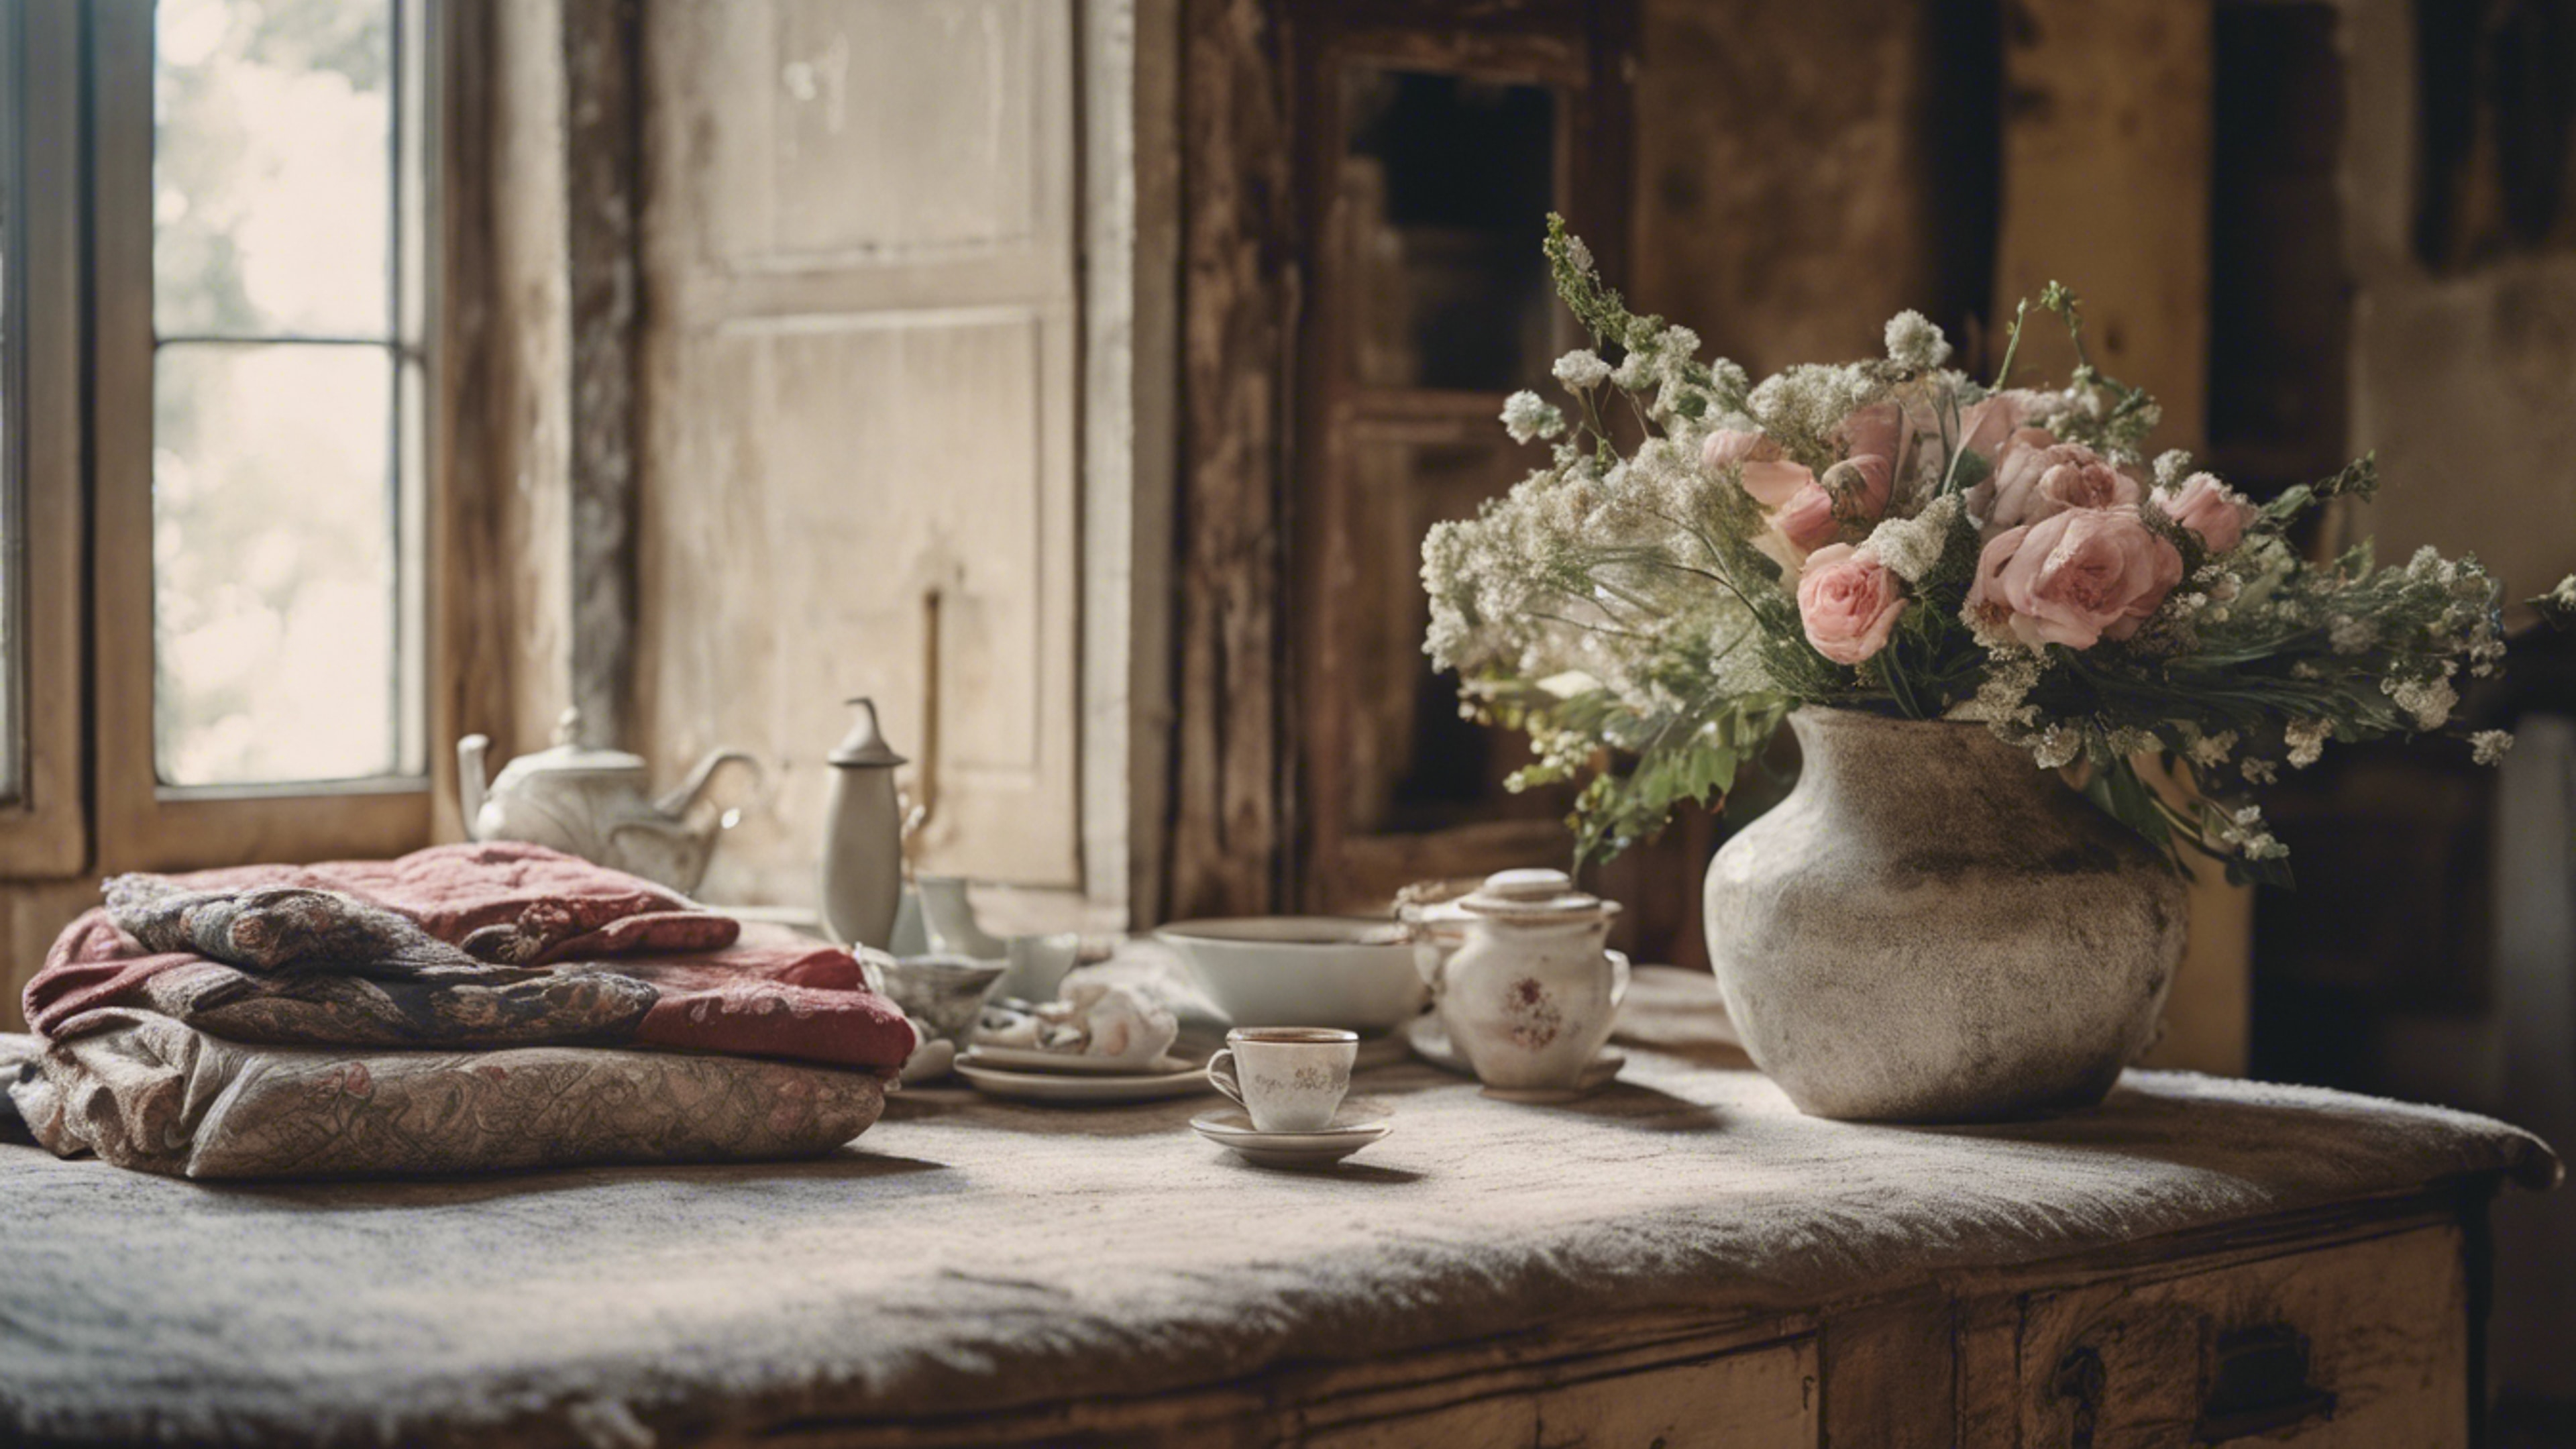 Vintage French country home interiors, full of hand-stitched textiles, distressed furniture, and fresh flowers. Wallpaper[3ce768b1b5e34f149bef]